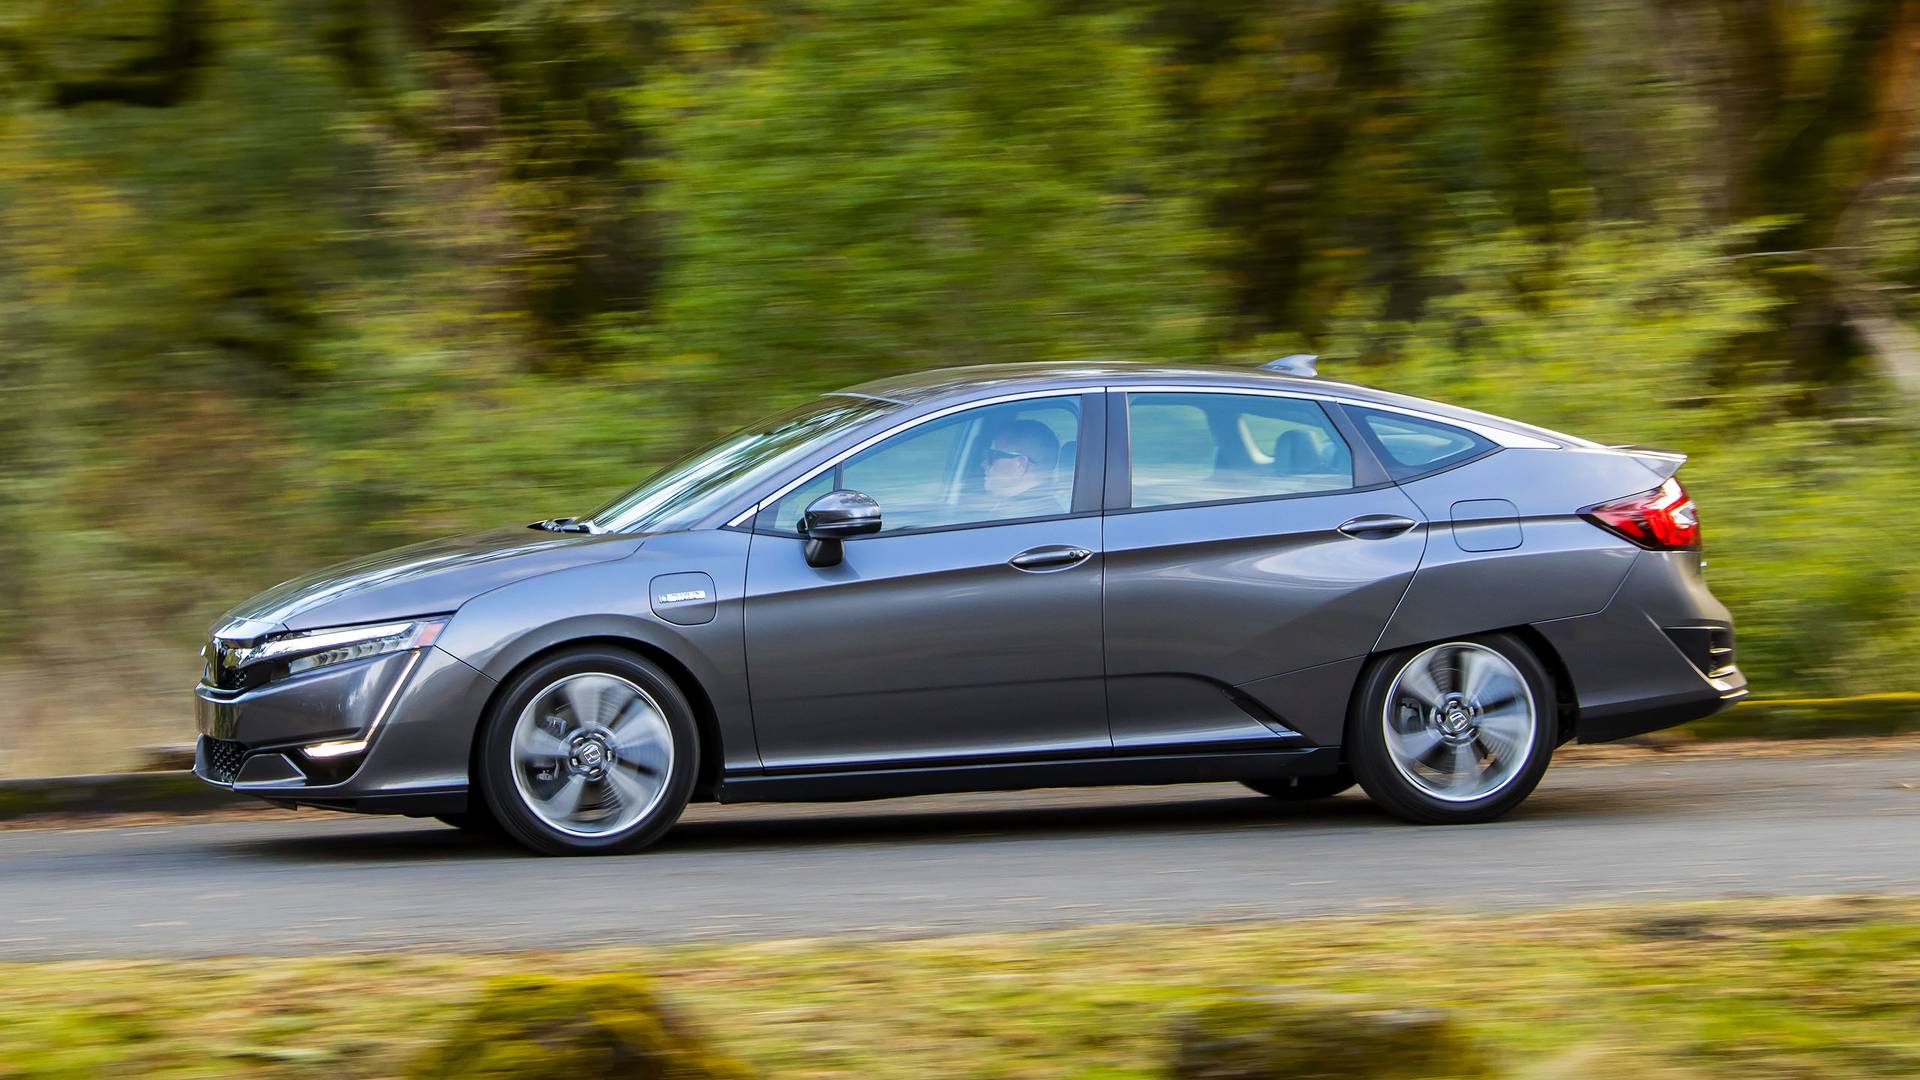 Honda Clarity - Affordable Electric cars